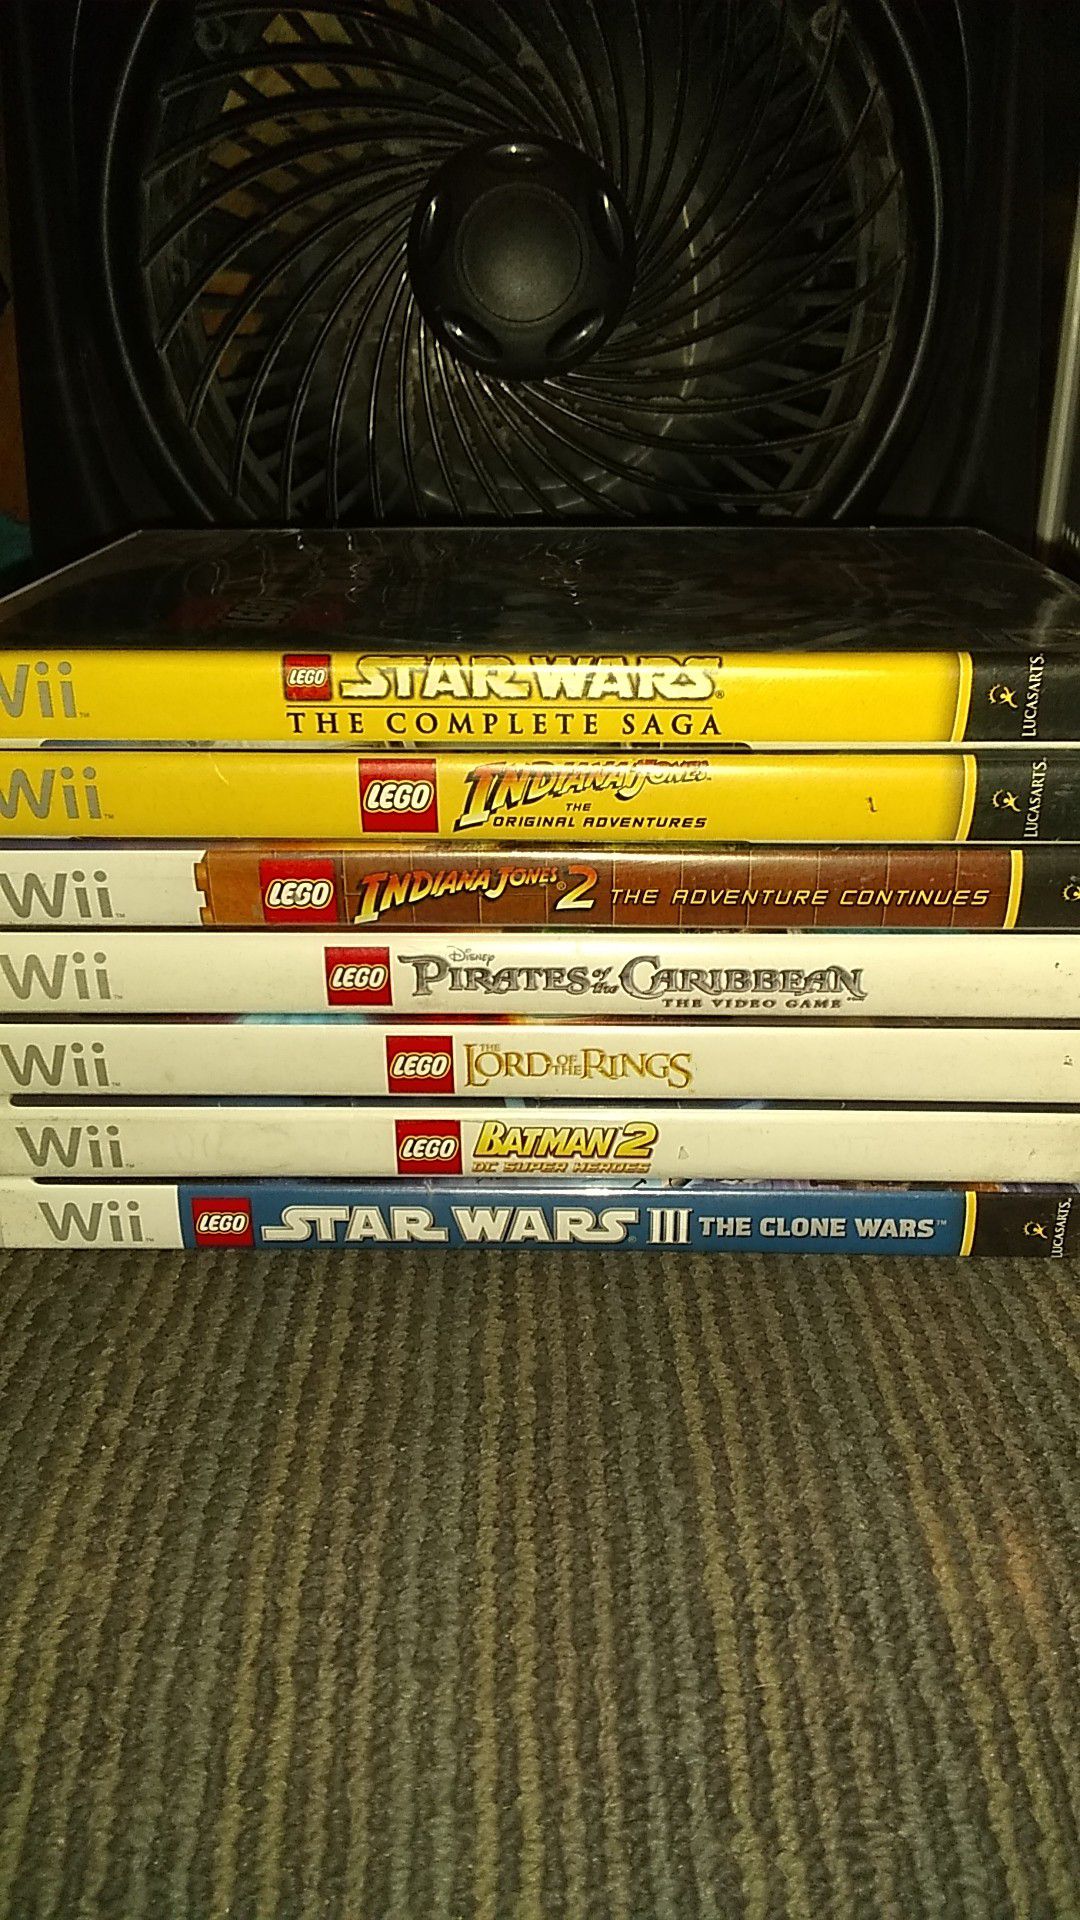 Wii Lego games: lot of 7